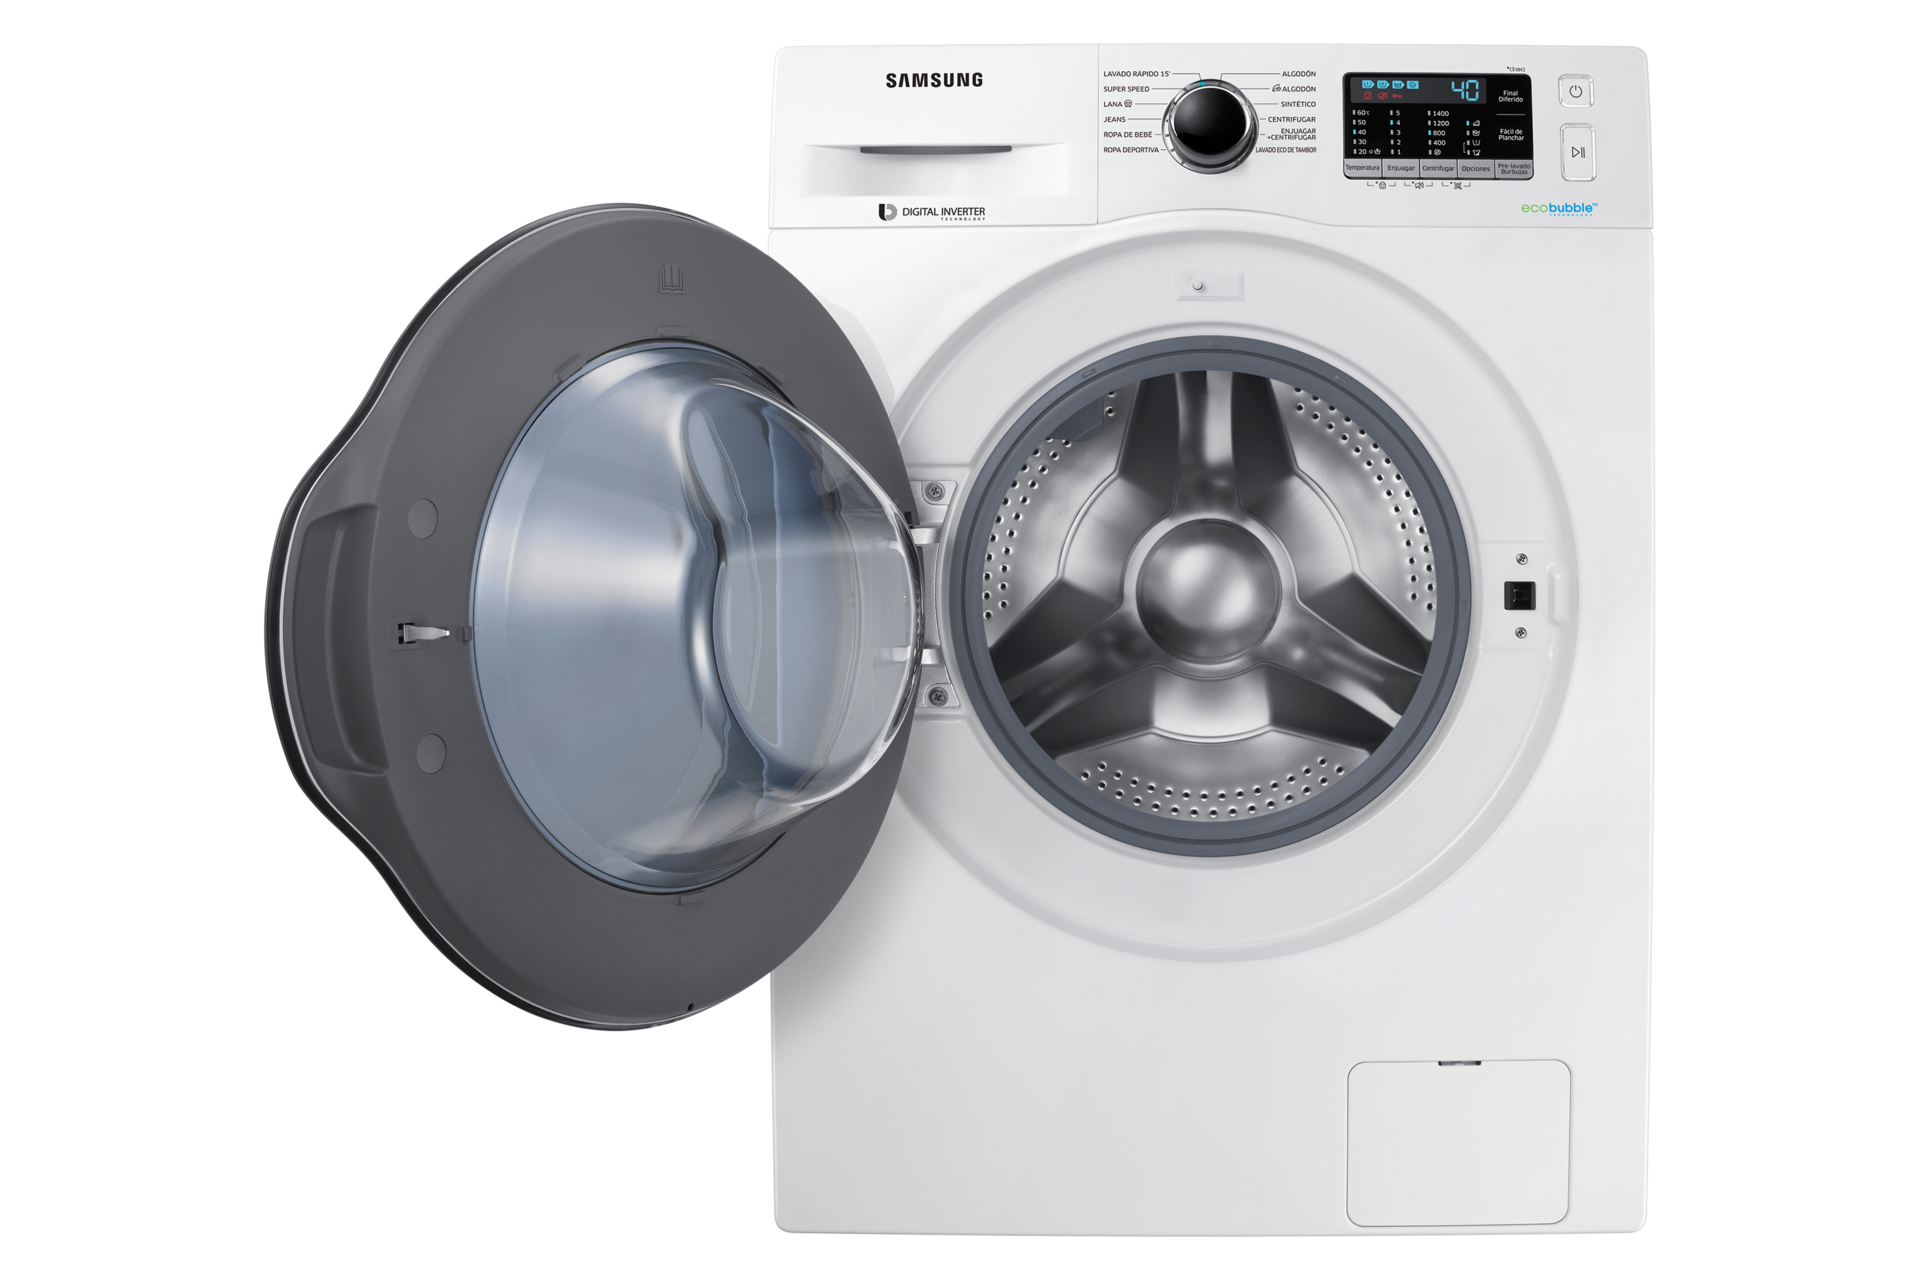 https://images.samsung.com/is/image/samsung/latin-washer-ww6800k-ww11k6800aw-ed-frontopenwhite-153864457?$650_519_PNG$